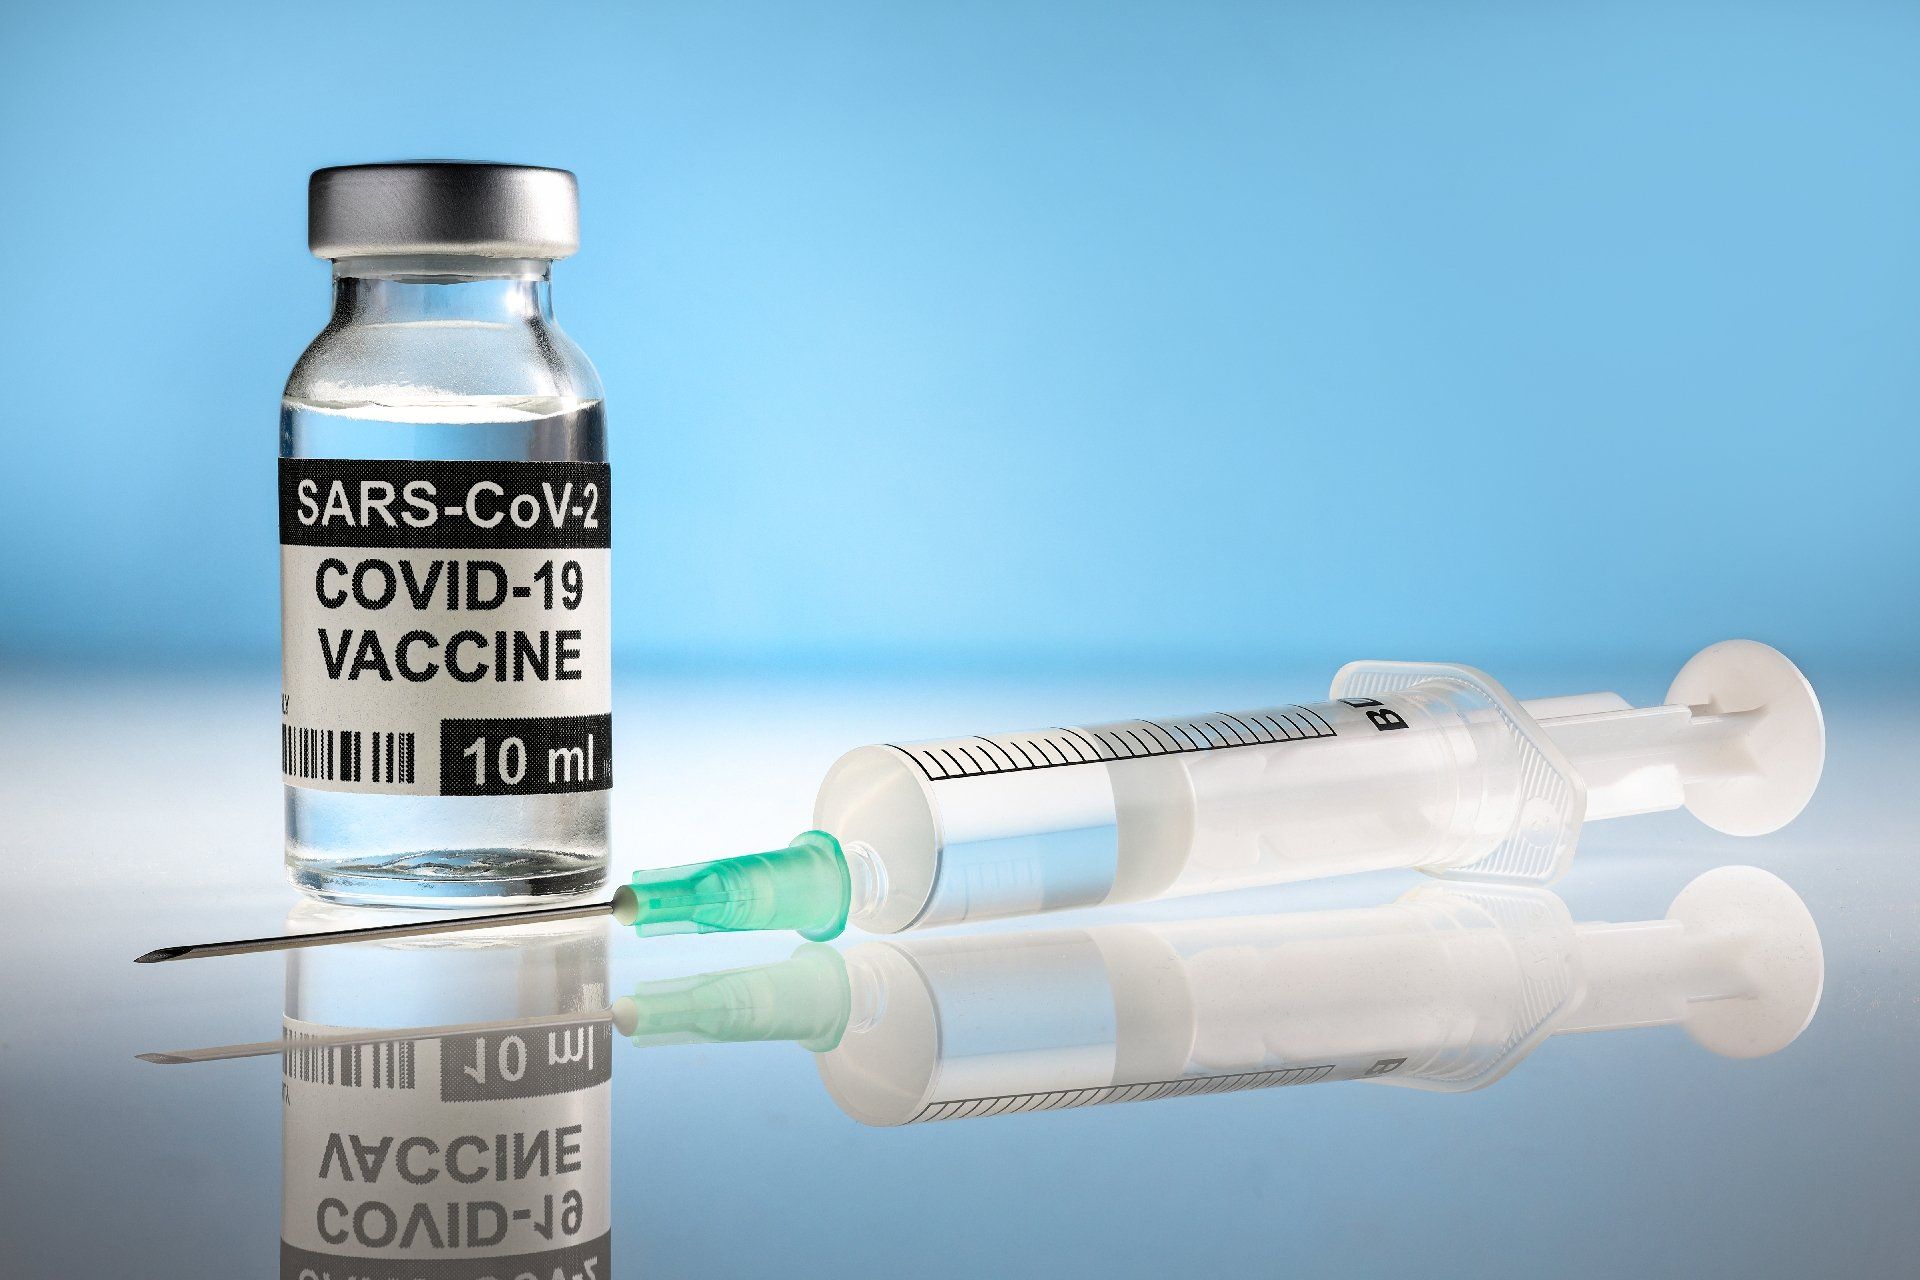 A bottle of covid-19 vaccine and a syringe on a table.